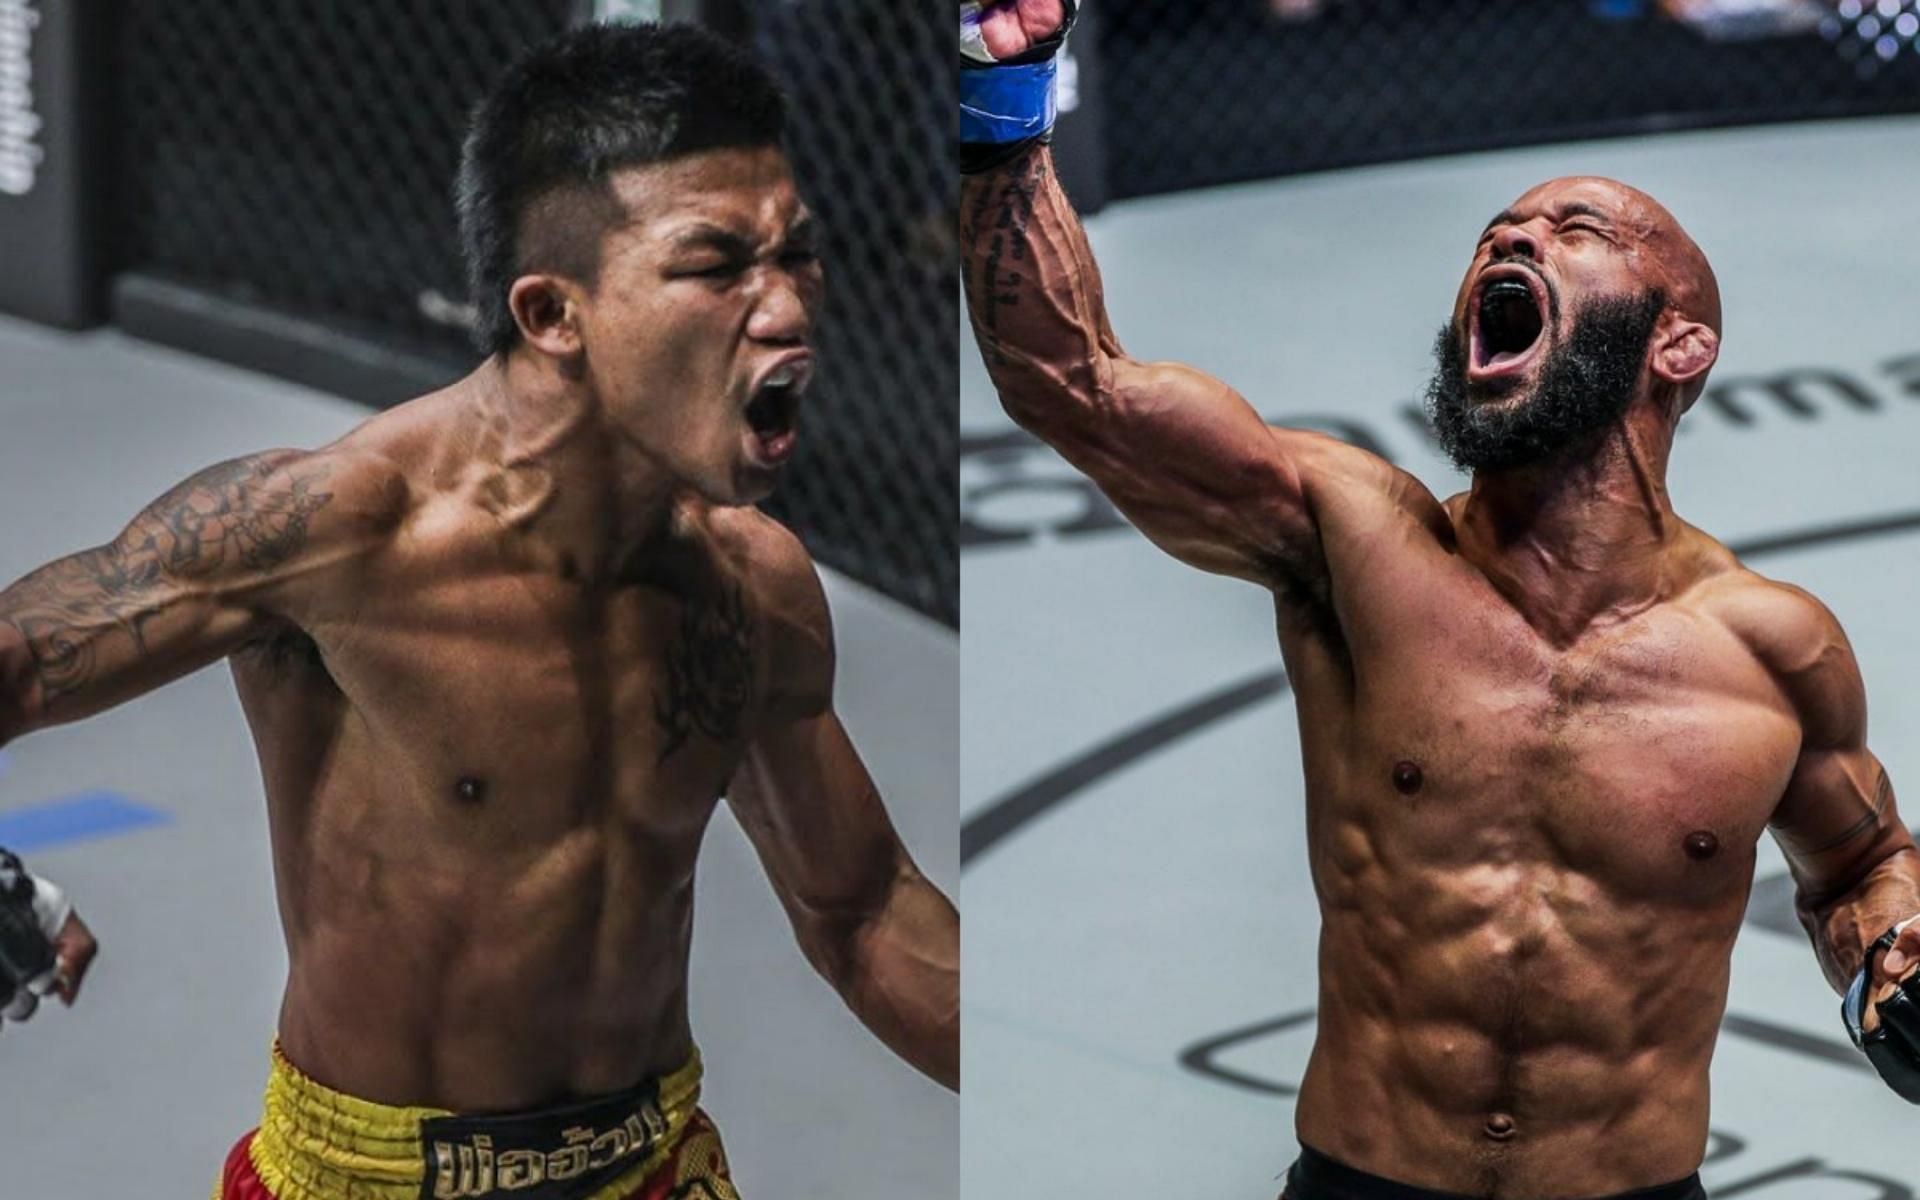 The special rules match between ONE Championship flyweight Muay Thai champion Rodtang Jitmuangnon (left) and former UFC champion Demetrious Johnson (right) at ONE Championship: X is one of the most anticipated bouts of the year. (Images courtesy of ONE Championship)